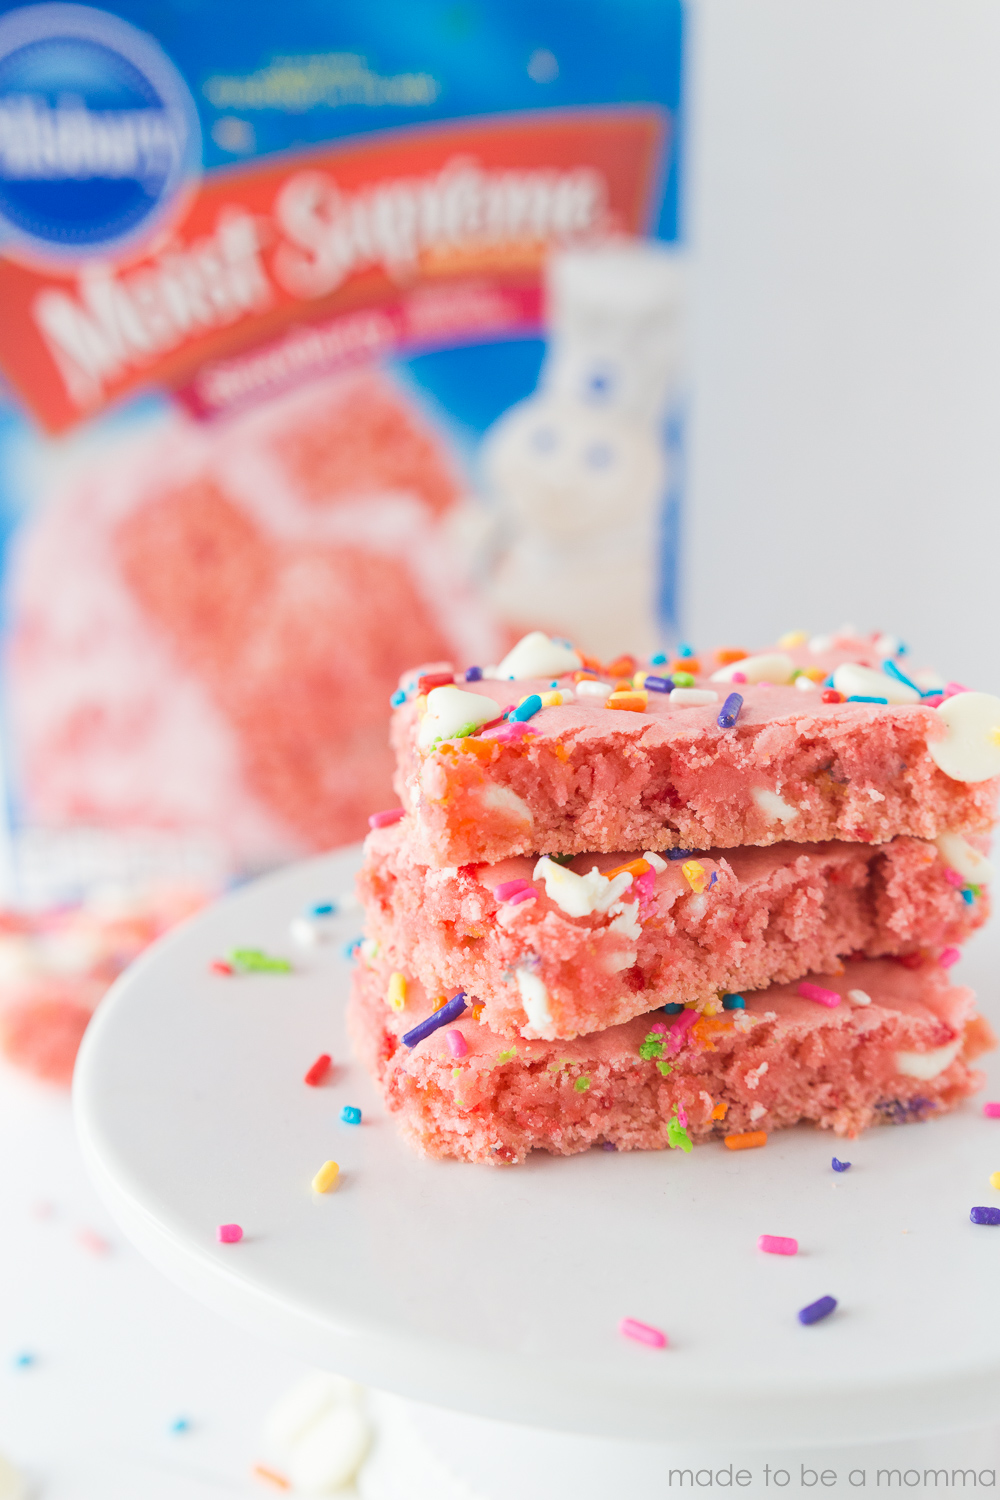 Strawberry Cake Mix Brownies: a fun and simple treat idea by using a cake mix. These strawberry brownies are bursting with color and only requires 4 simple ingredients